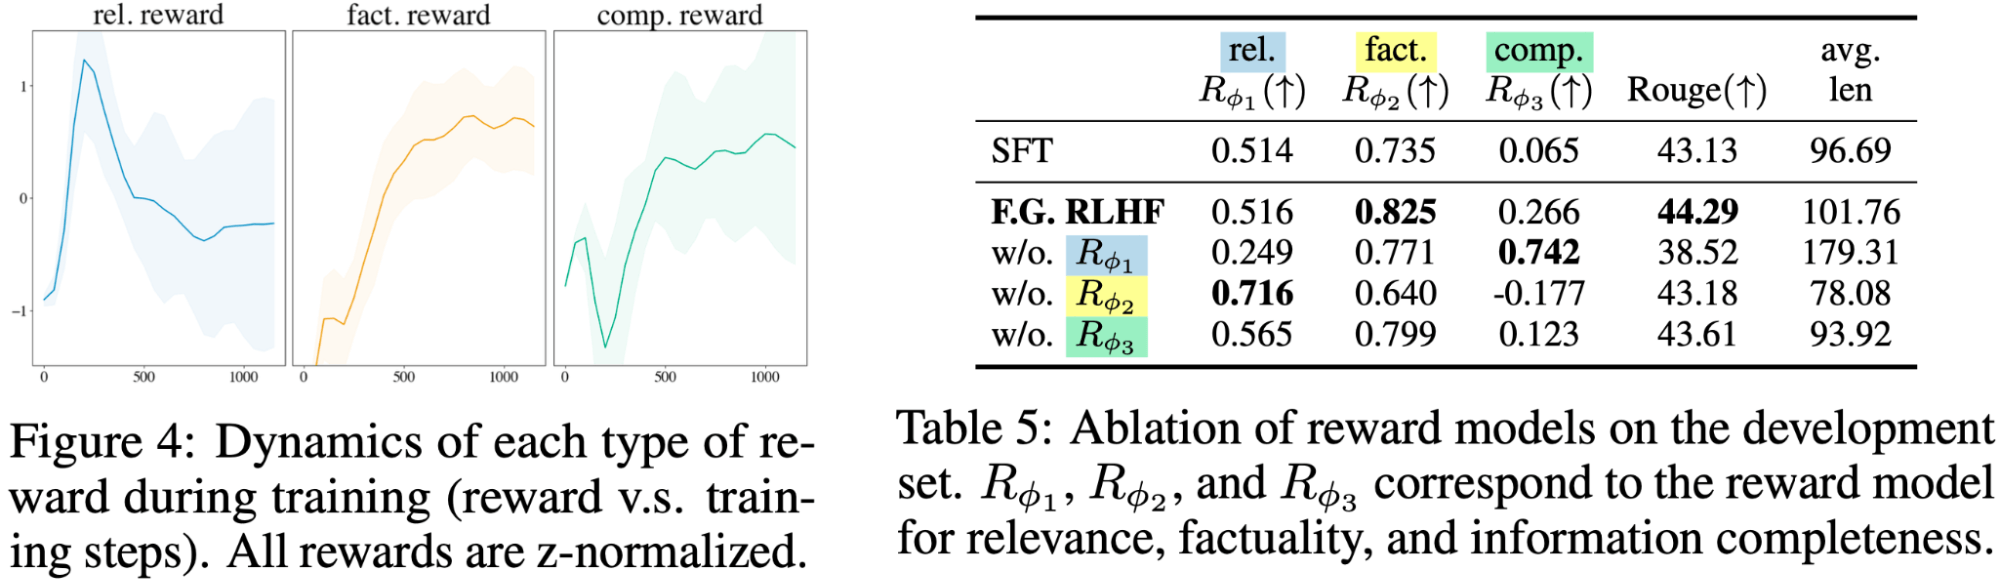 Figure showing graphs of reward scores changing during model training, and a table with an ablation of reward models used